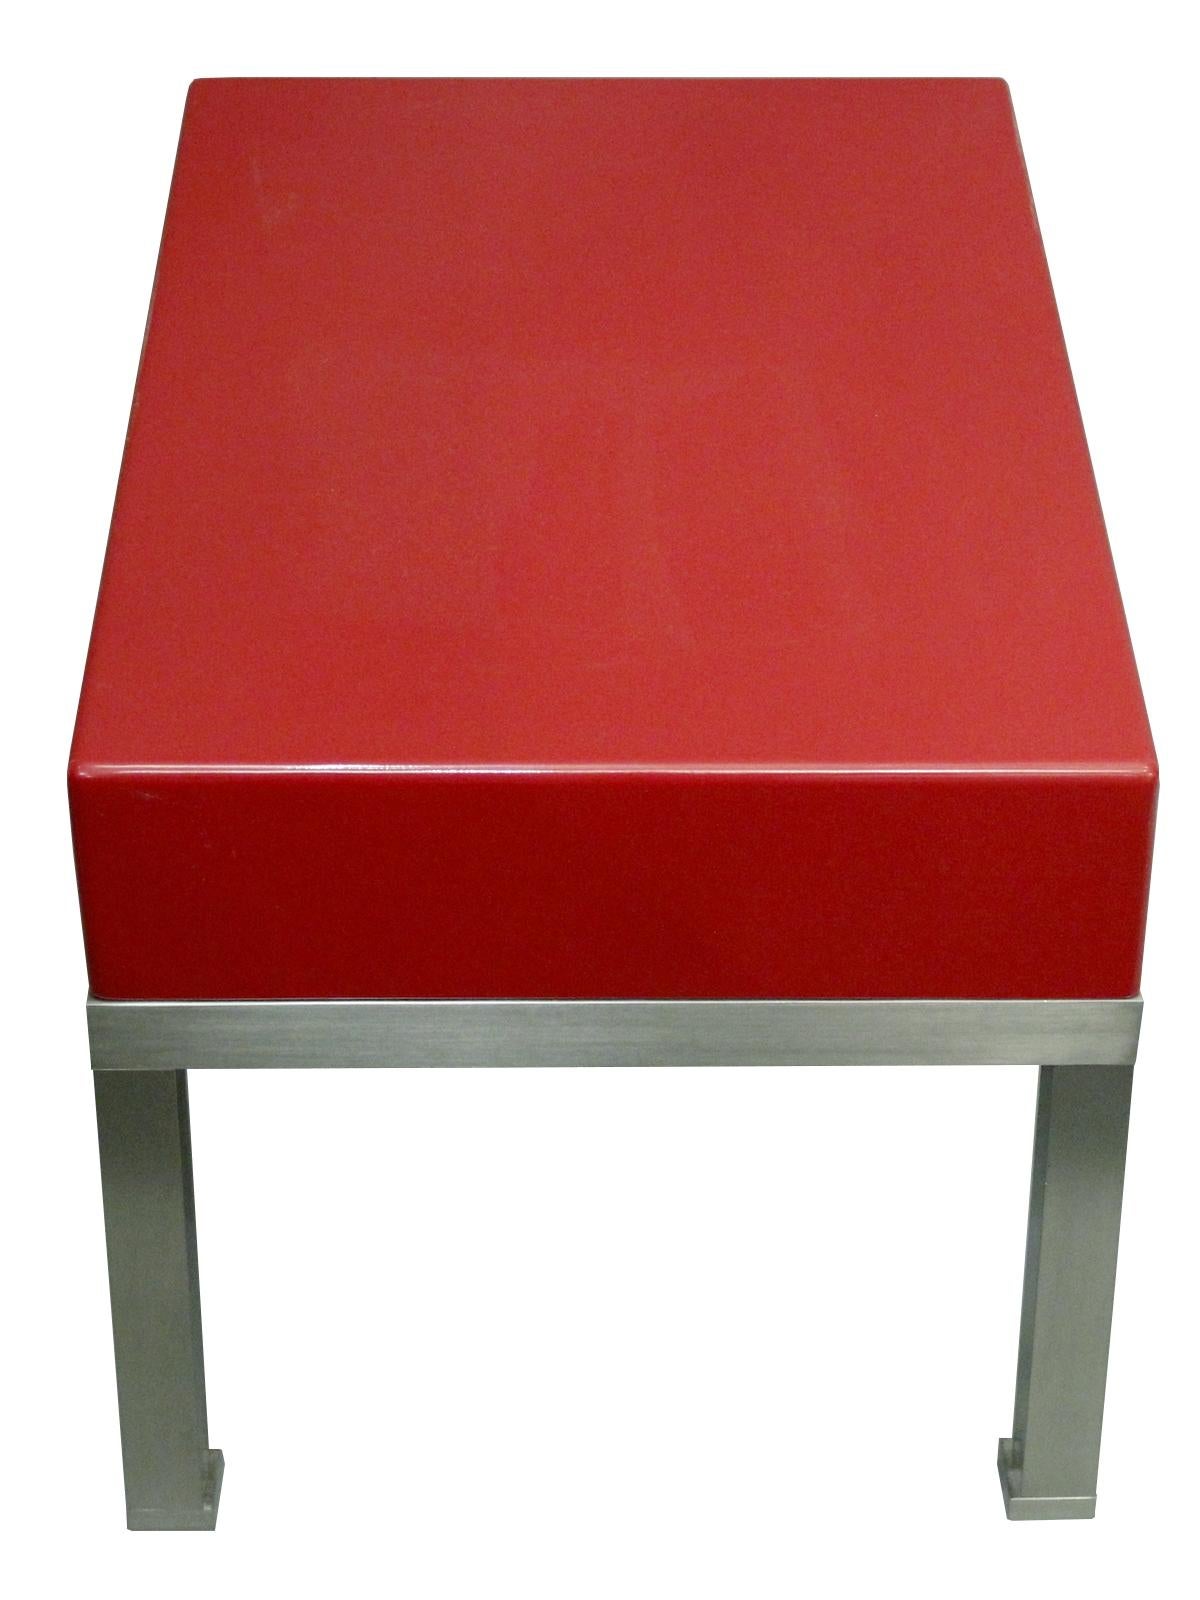 French Pair of End Tables in Red Lacquer by Guy Lefevre for Maison Jansen, France 1970s For Sale